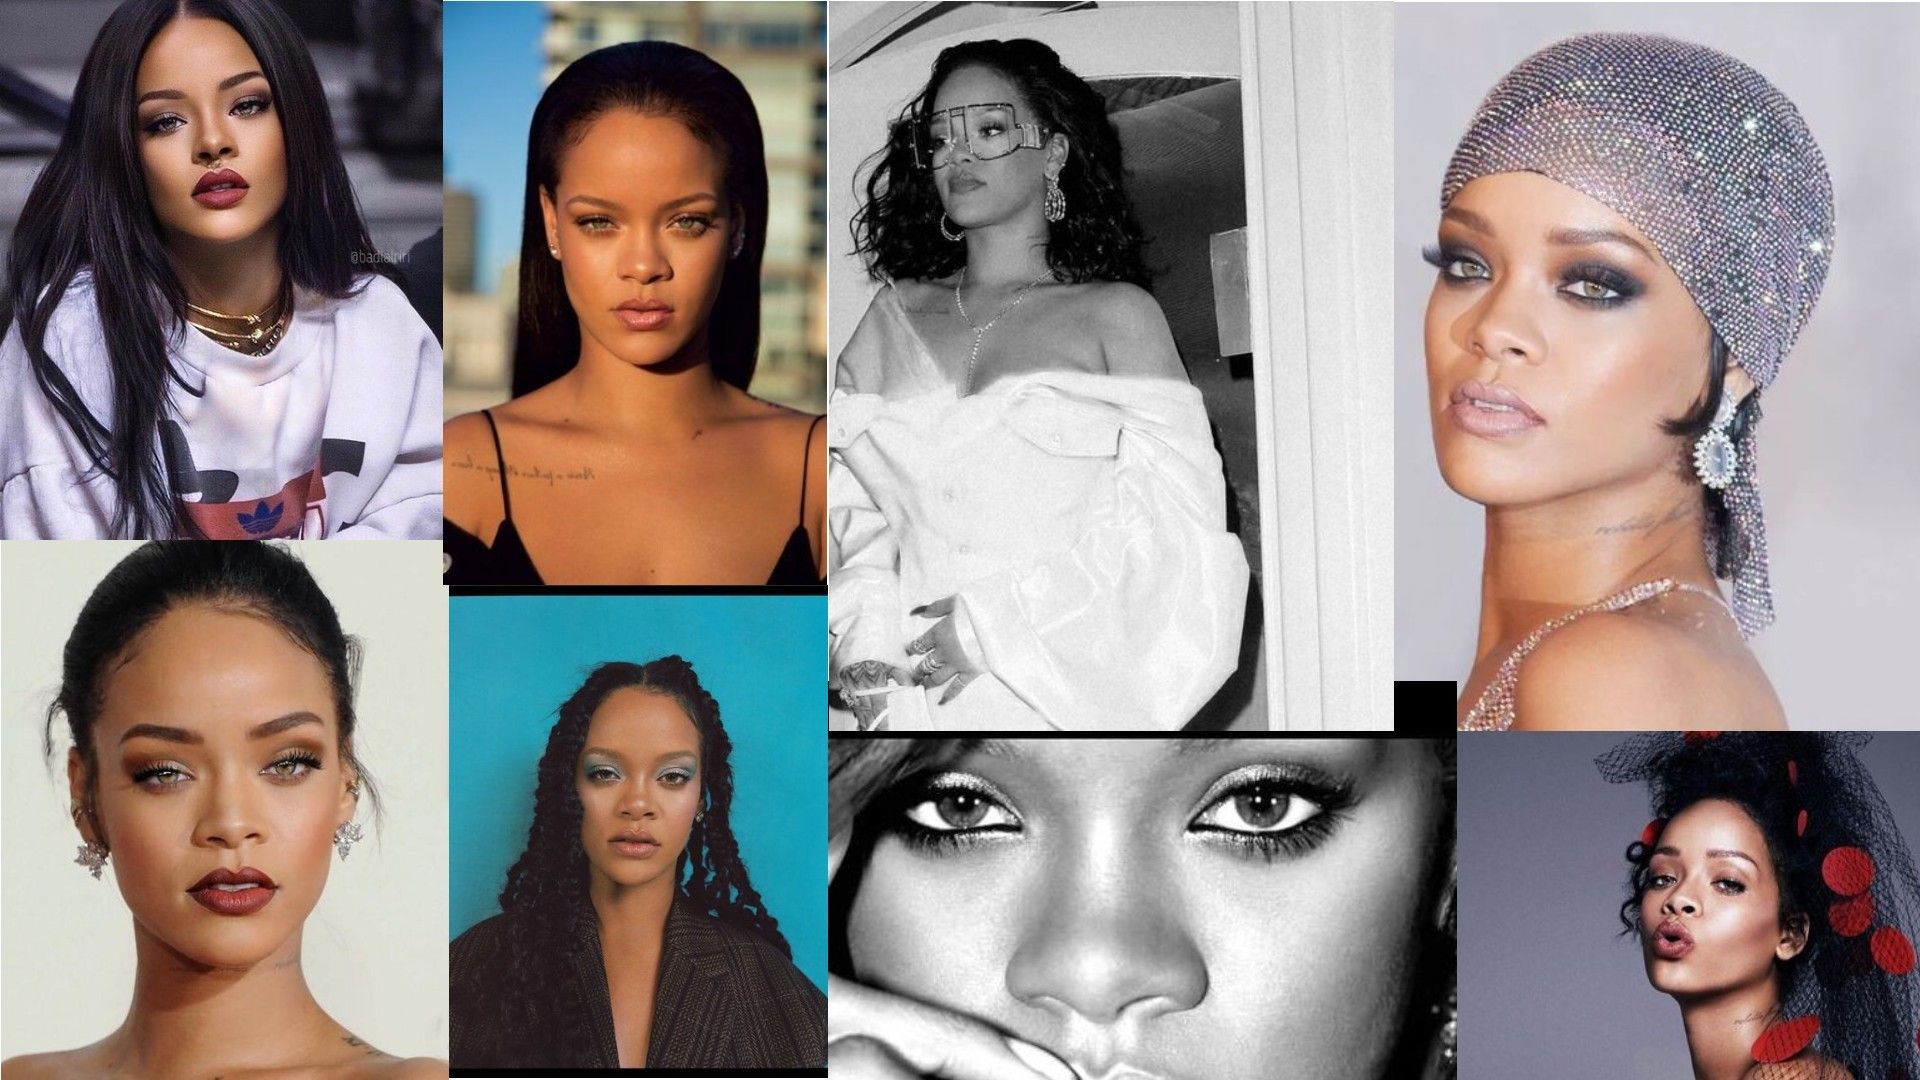 A collage of pictures featuring rihanna and other celebrities - Rihanna